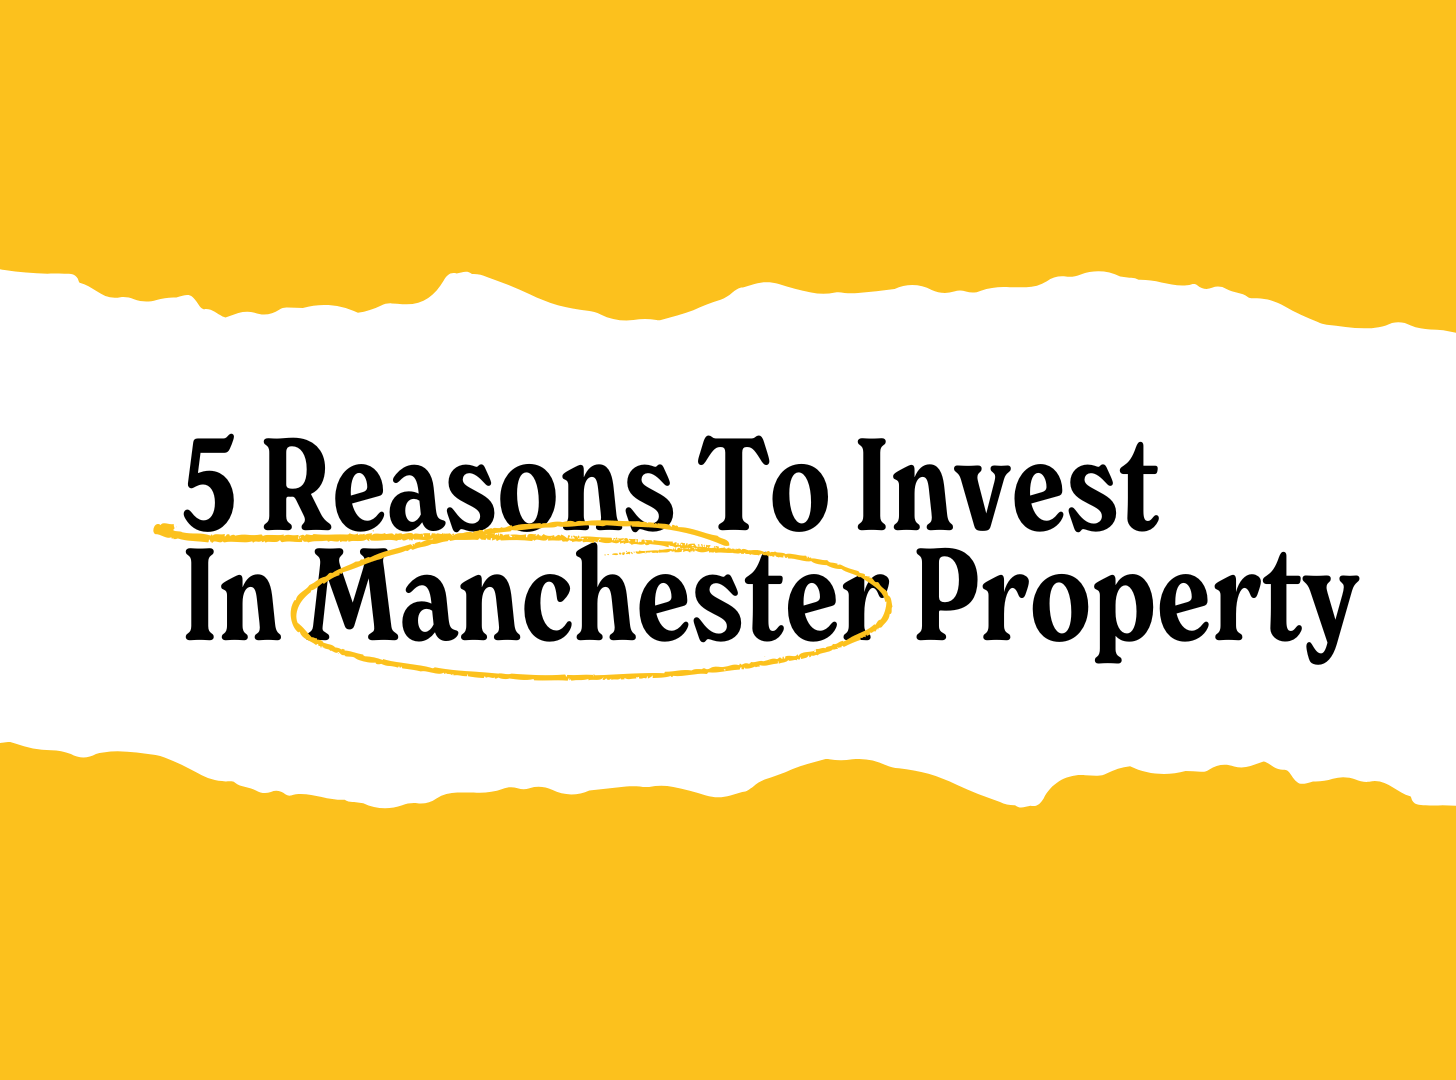 Invest in Manchester